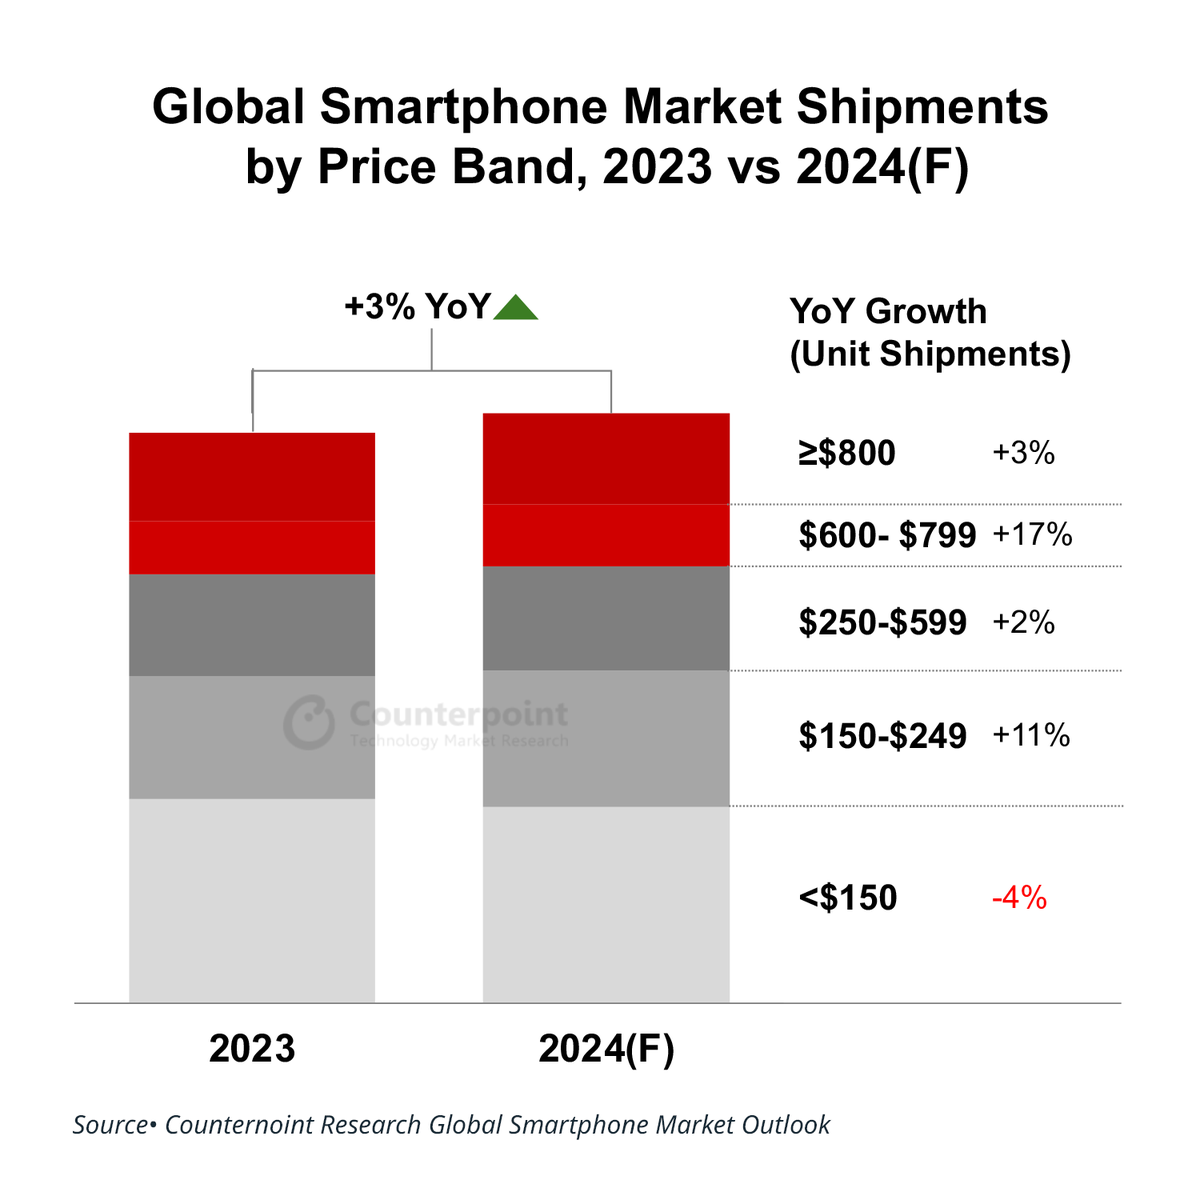 Just published: Global Smartphone Shipments to See Modest Rebound in 2024 Driven by Premium, Budget-Economy Segments Key takeaways: - Global smartphone shipments in 2024 are expected to increase by 3% to reach 1.2 billion units. - The budget-economy segment ($150-$249) is…